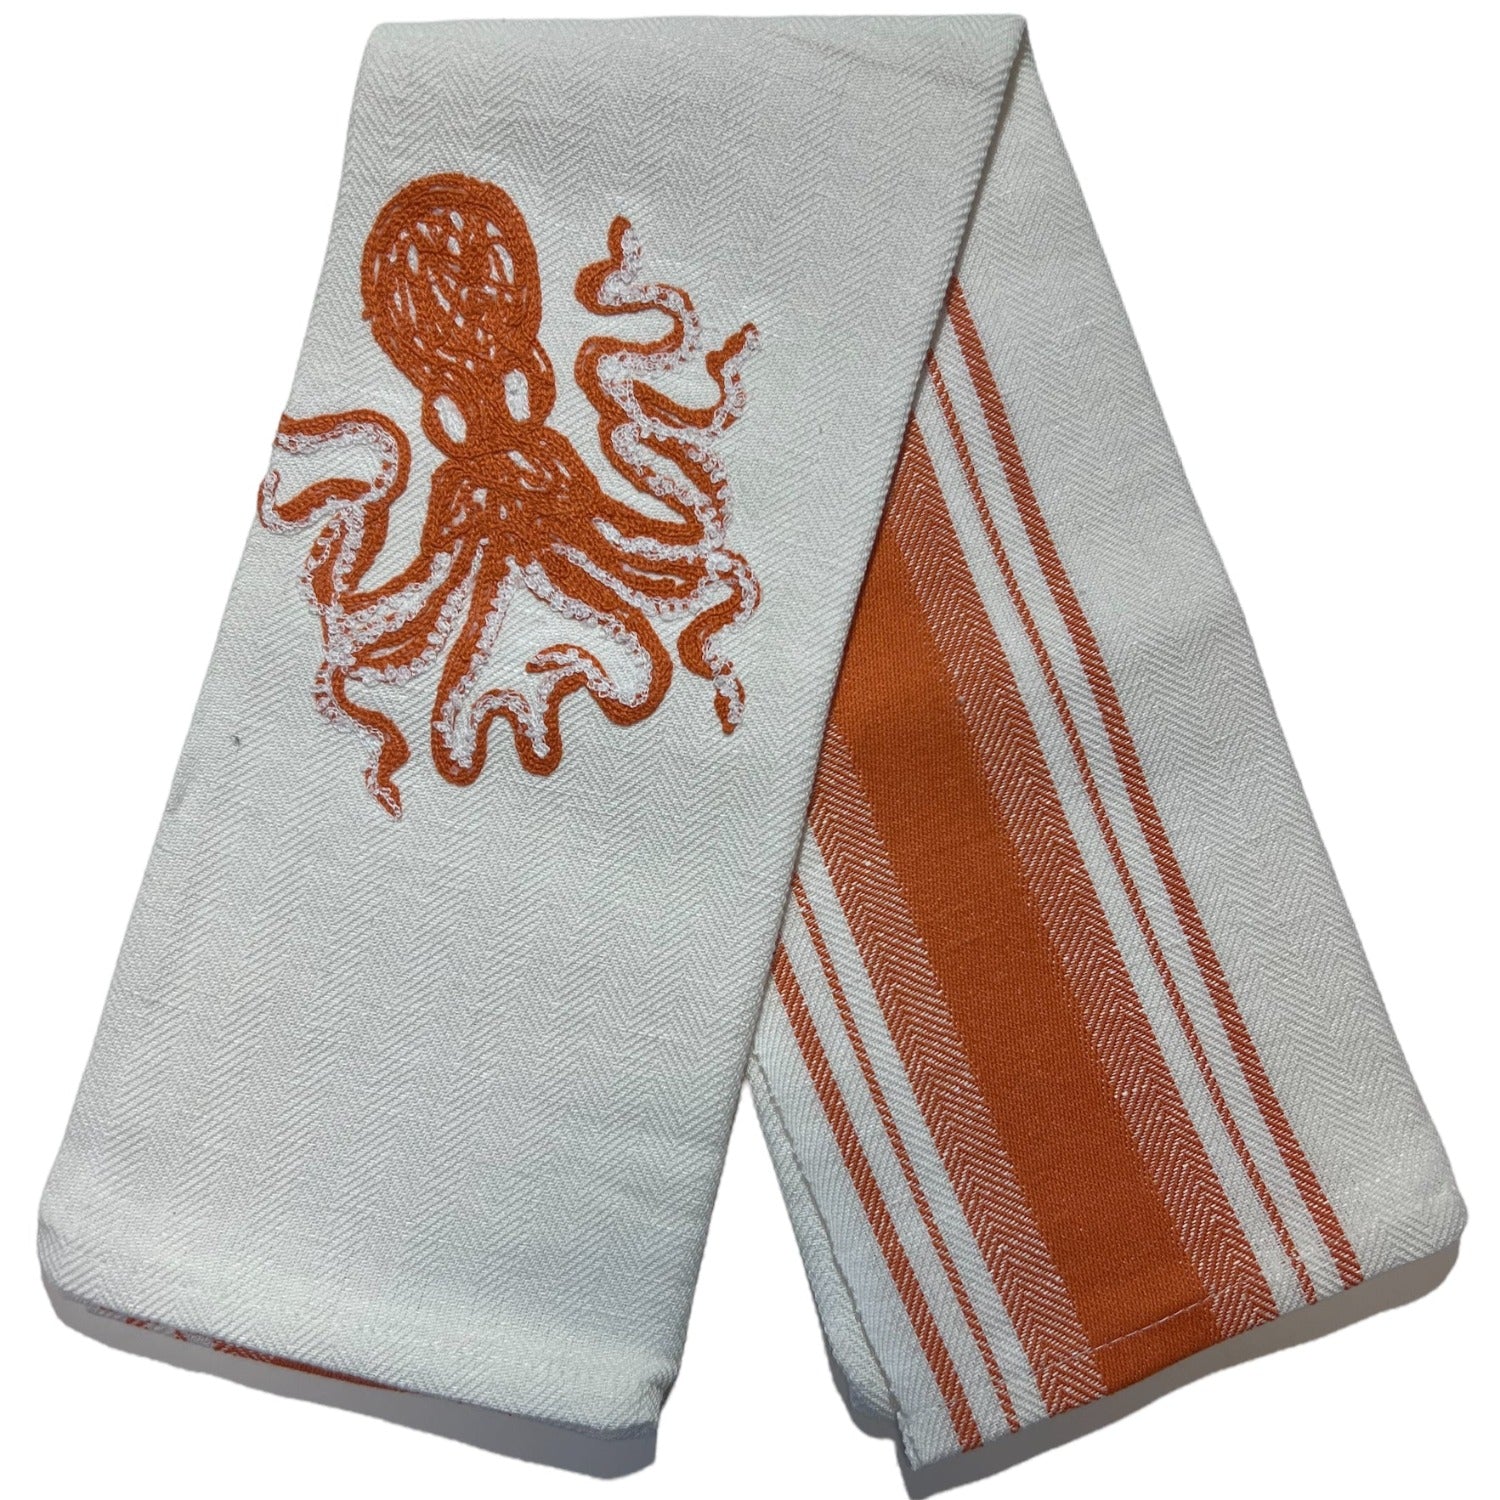 TDC Fragole Octopus Kraken Kitchen Dish Towel & Octopus Hand Towels - Timothy De Clue Collection Exclusive  Made in Italy 